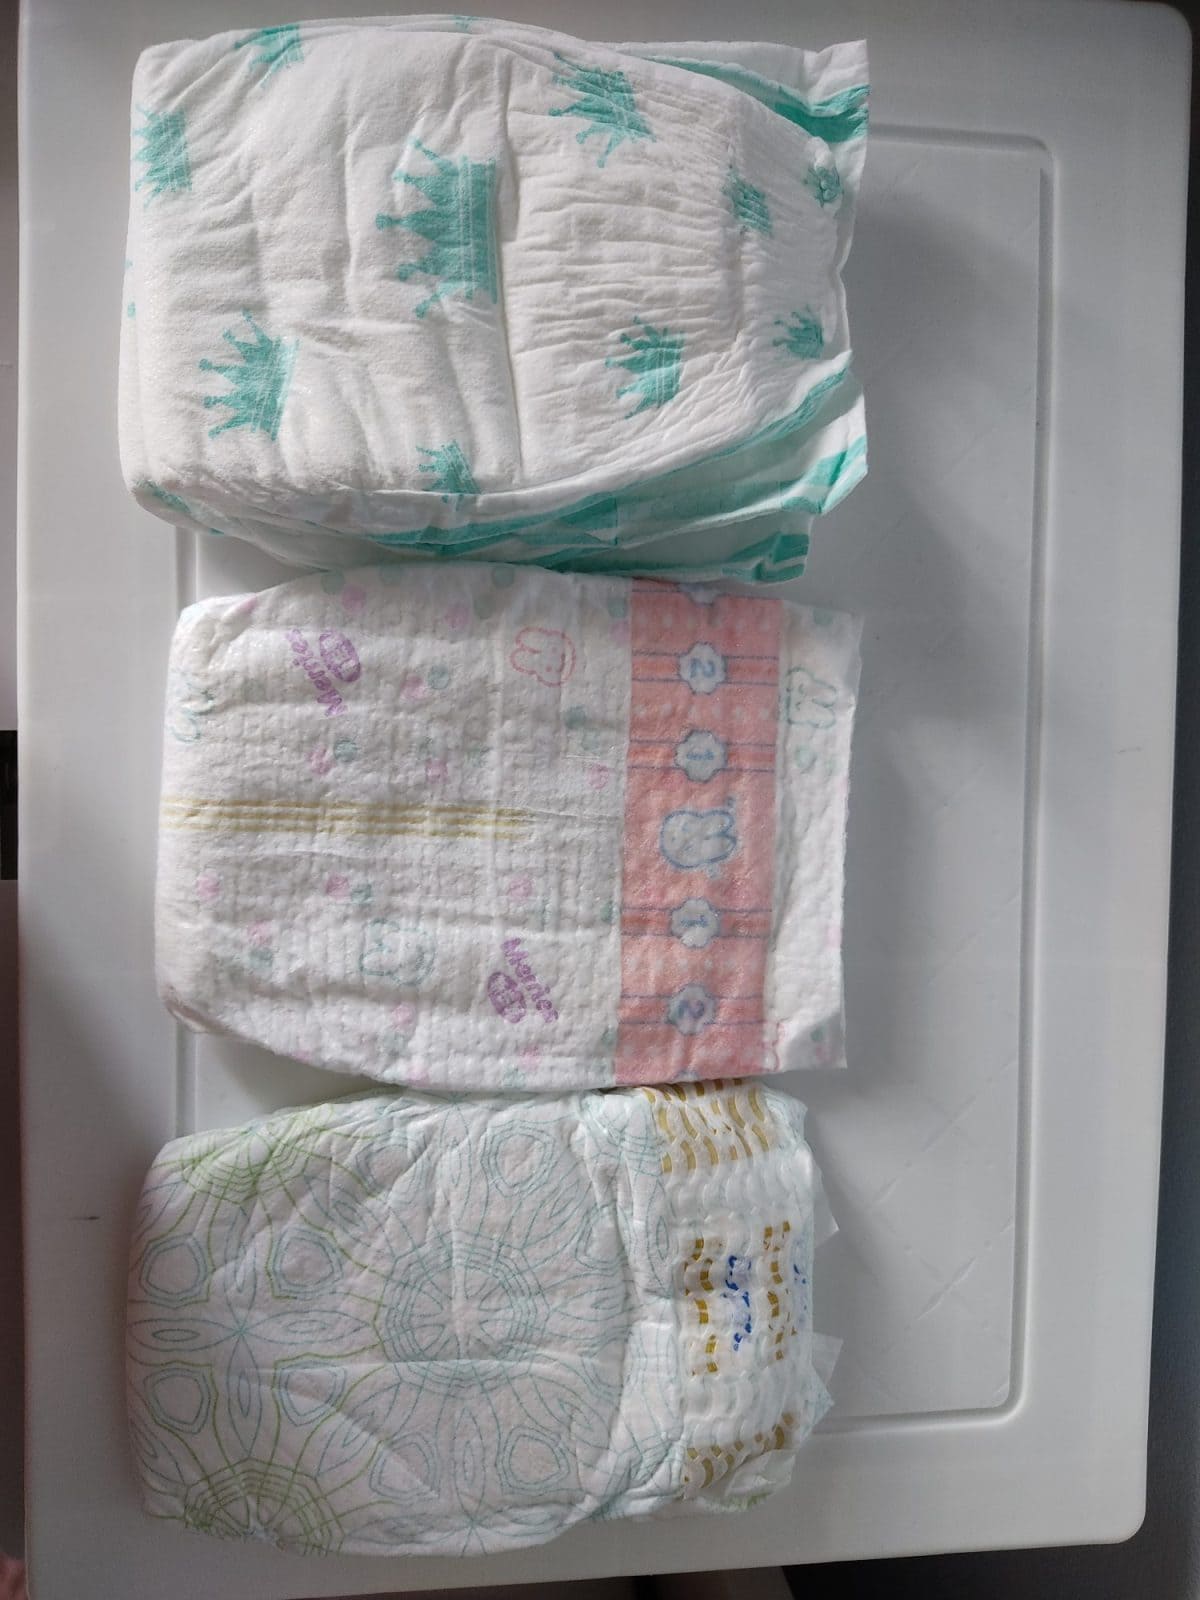 three different sizes of diapers from three different brands. Treatment options for diaper rash.